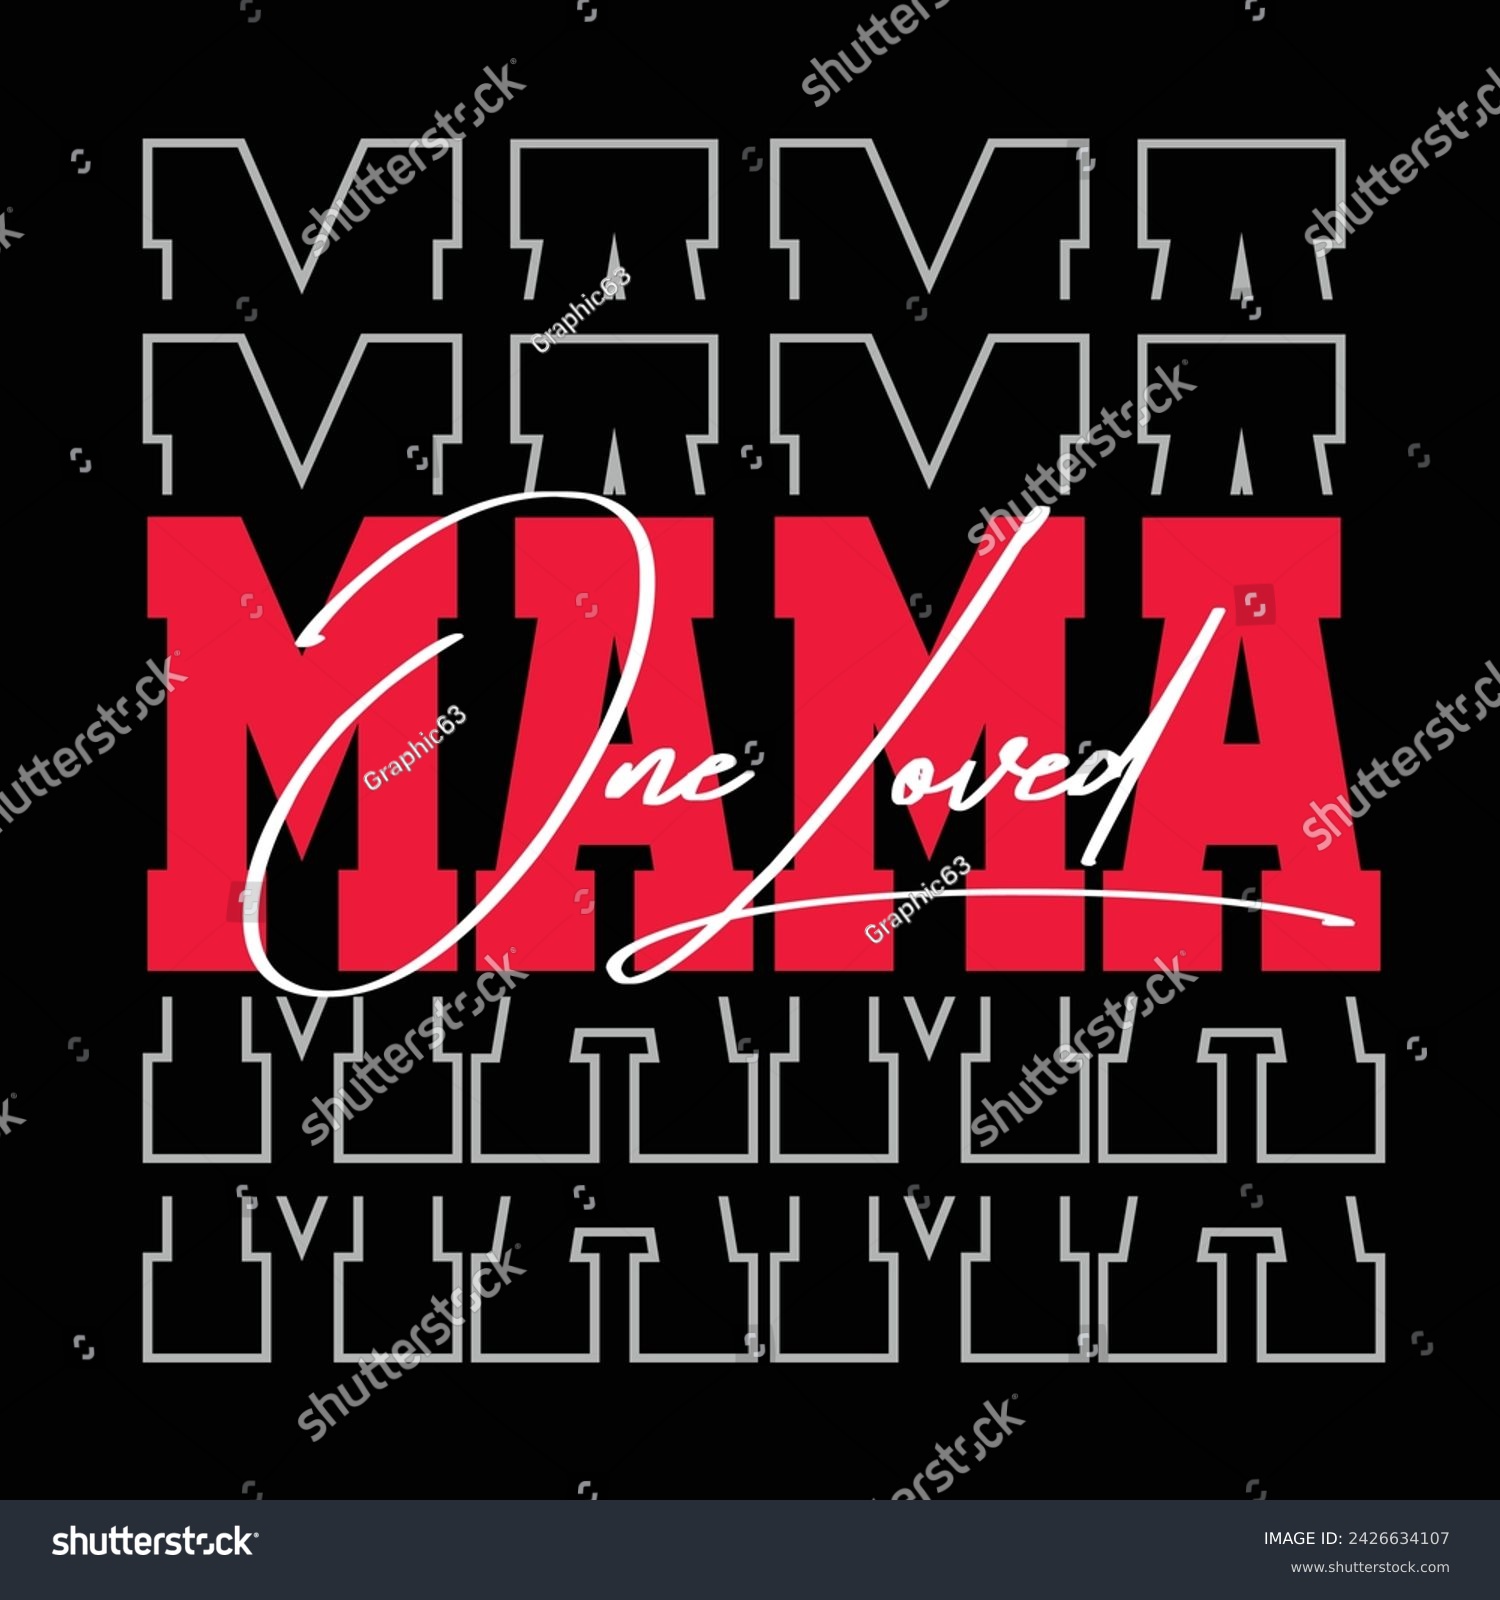 SVG of One Loved Mama. Mothers Day, Mom Text Quote Typography t shirt backround banner poster design vector illustration. svg